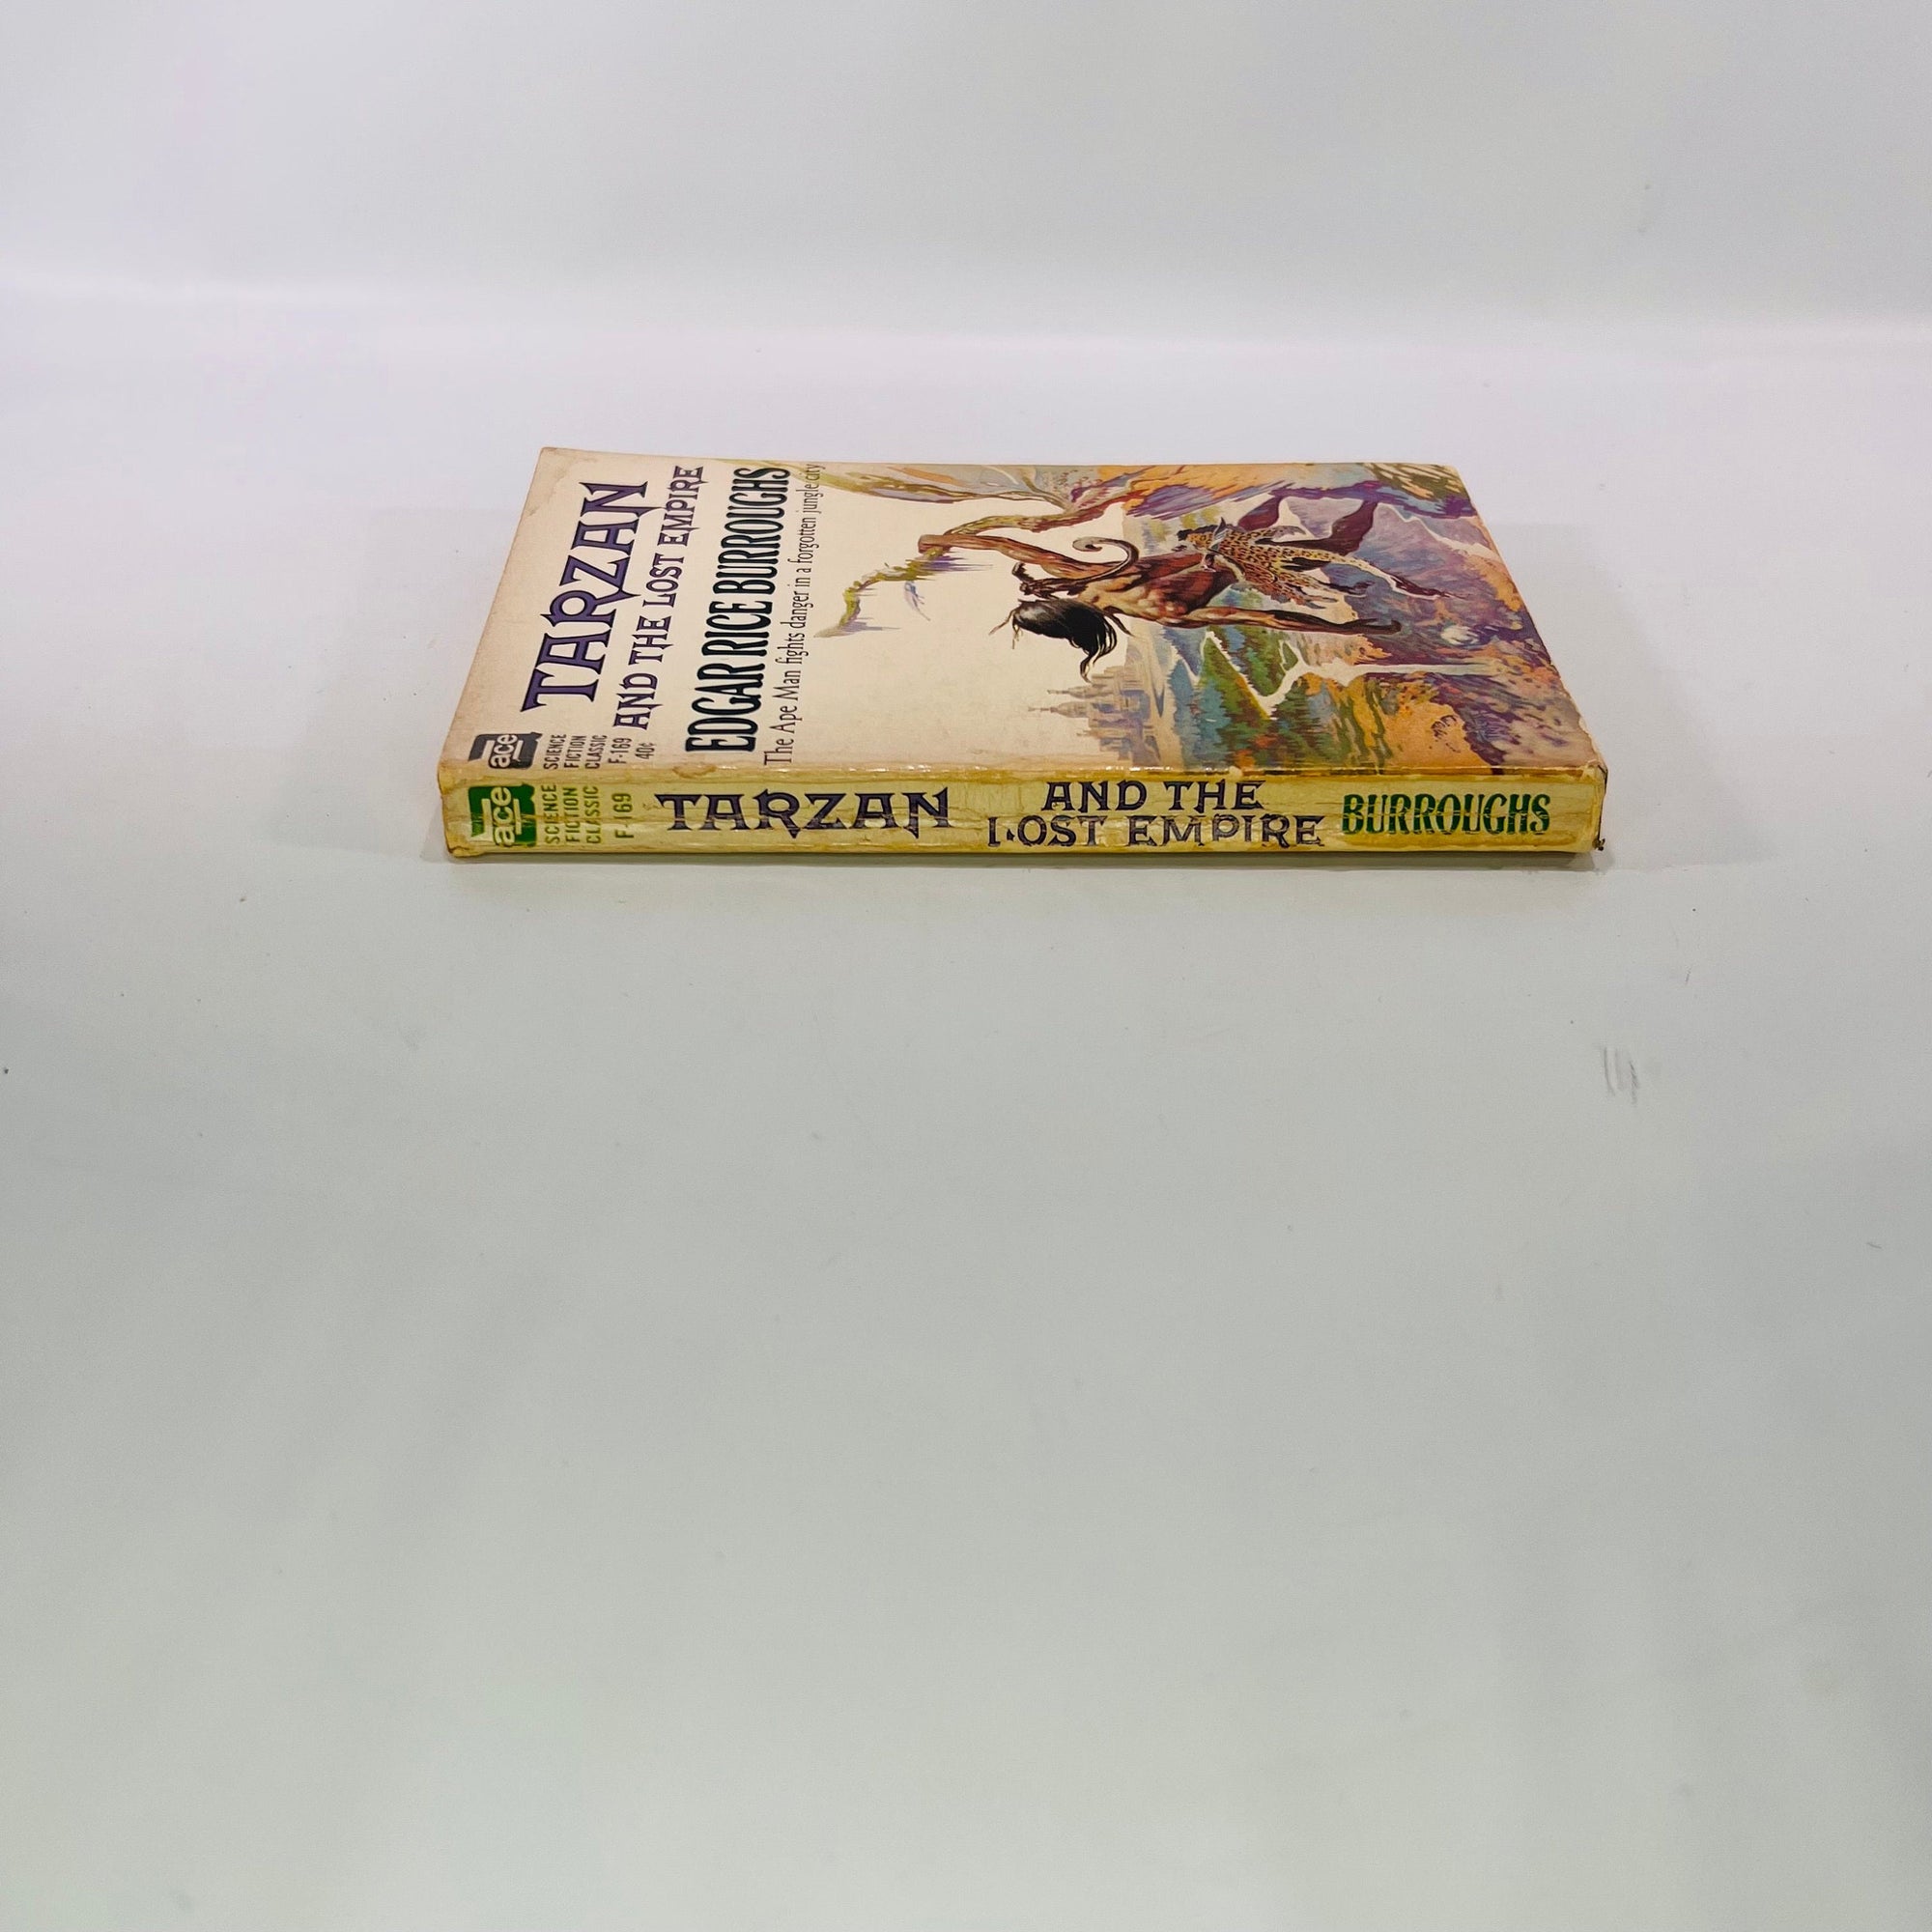 Tarzan and the Lost Empire by Edgar Rice Burroughs Book 12 Ace Books F-169